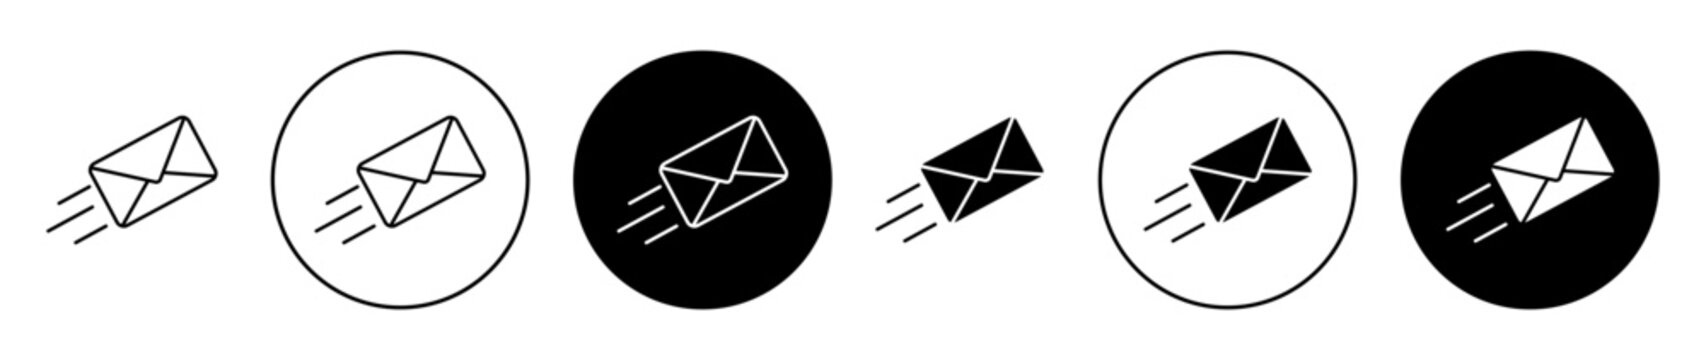 Express Mail icon set in black filled and outlined style. suitable for UI designs